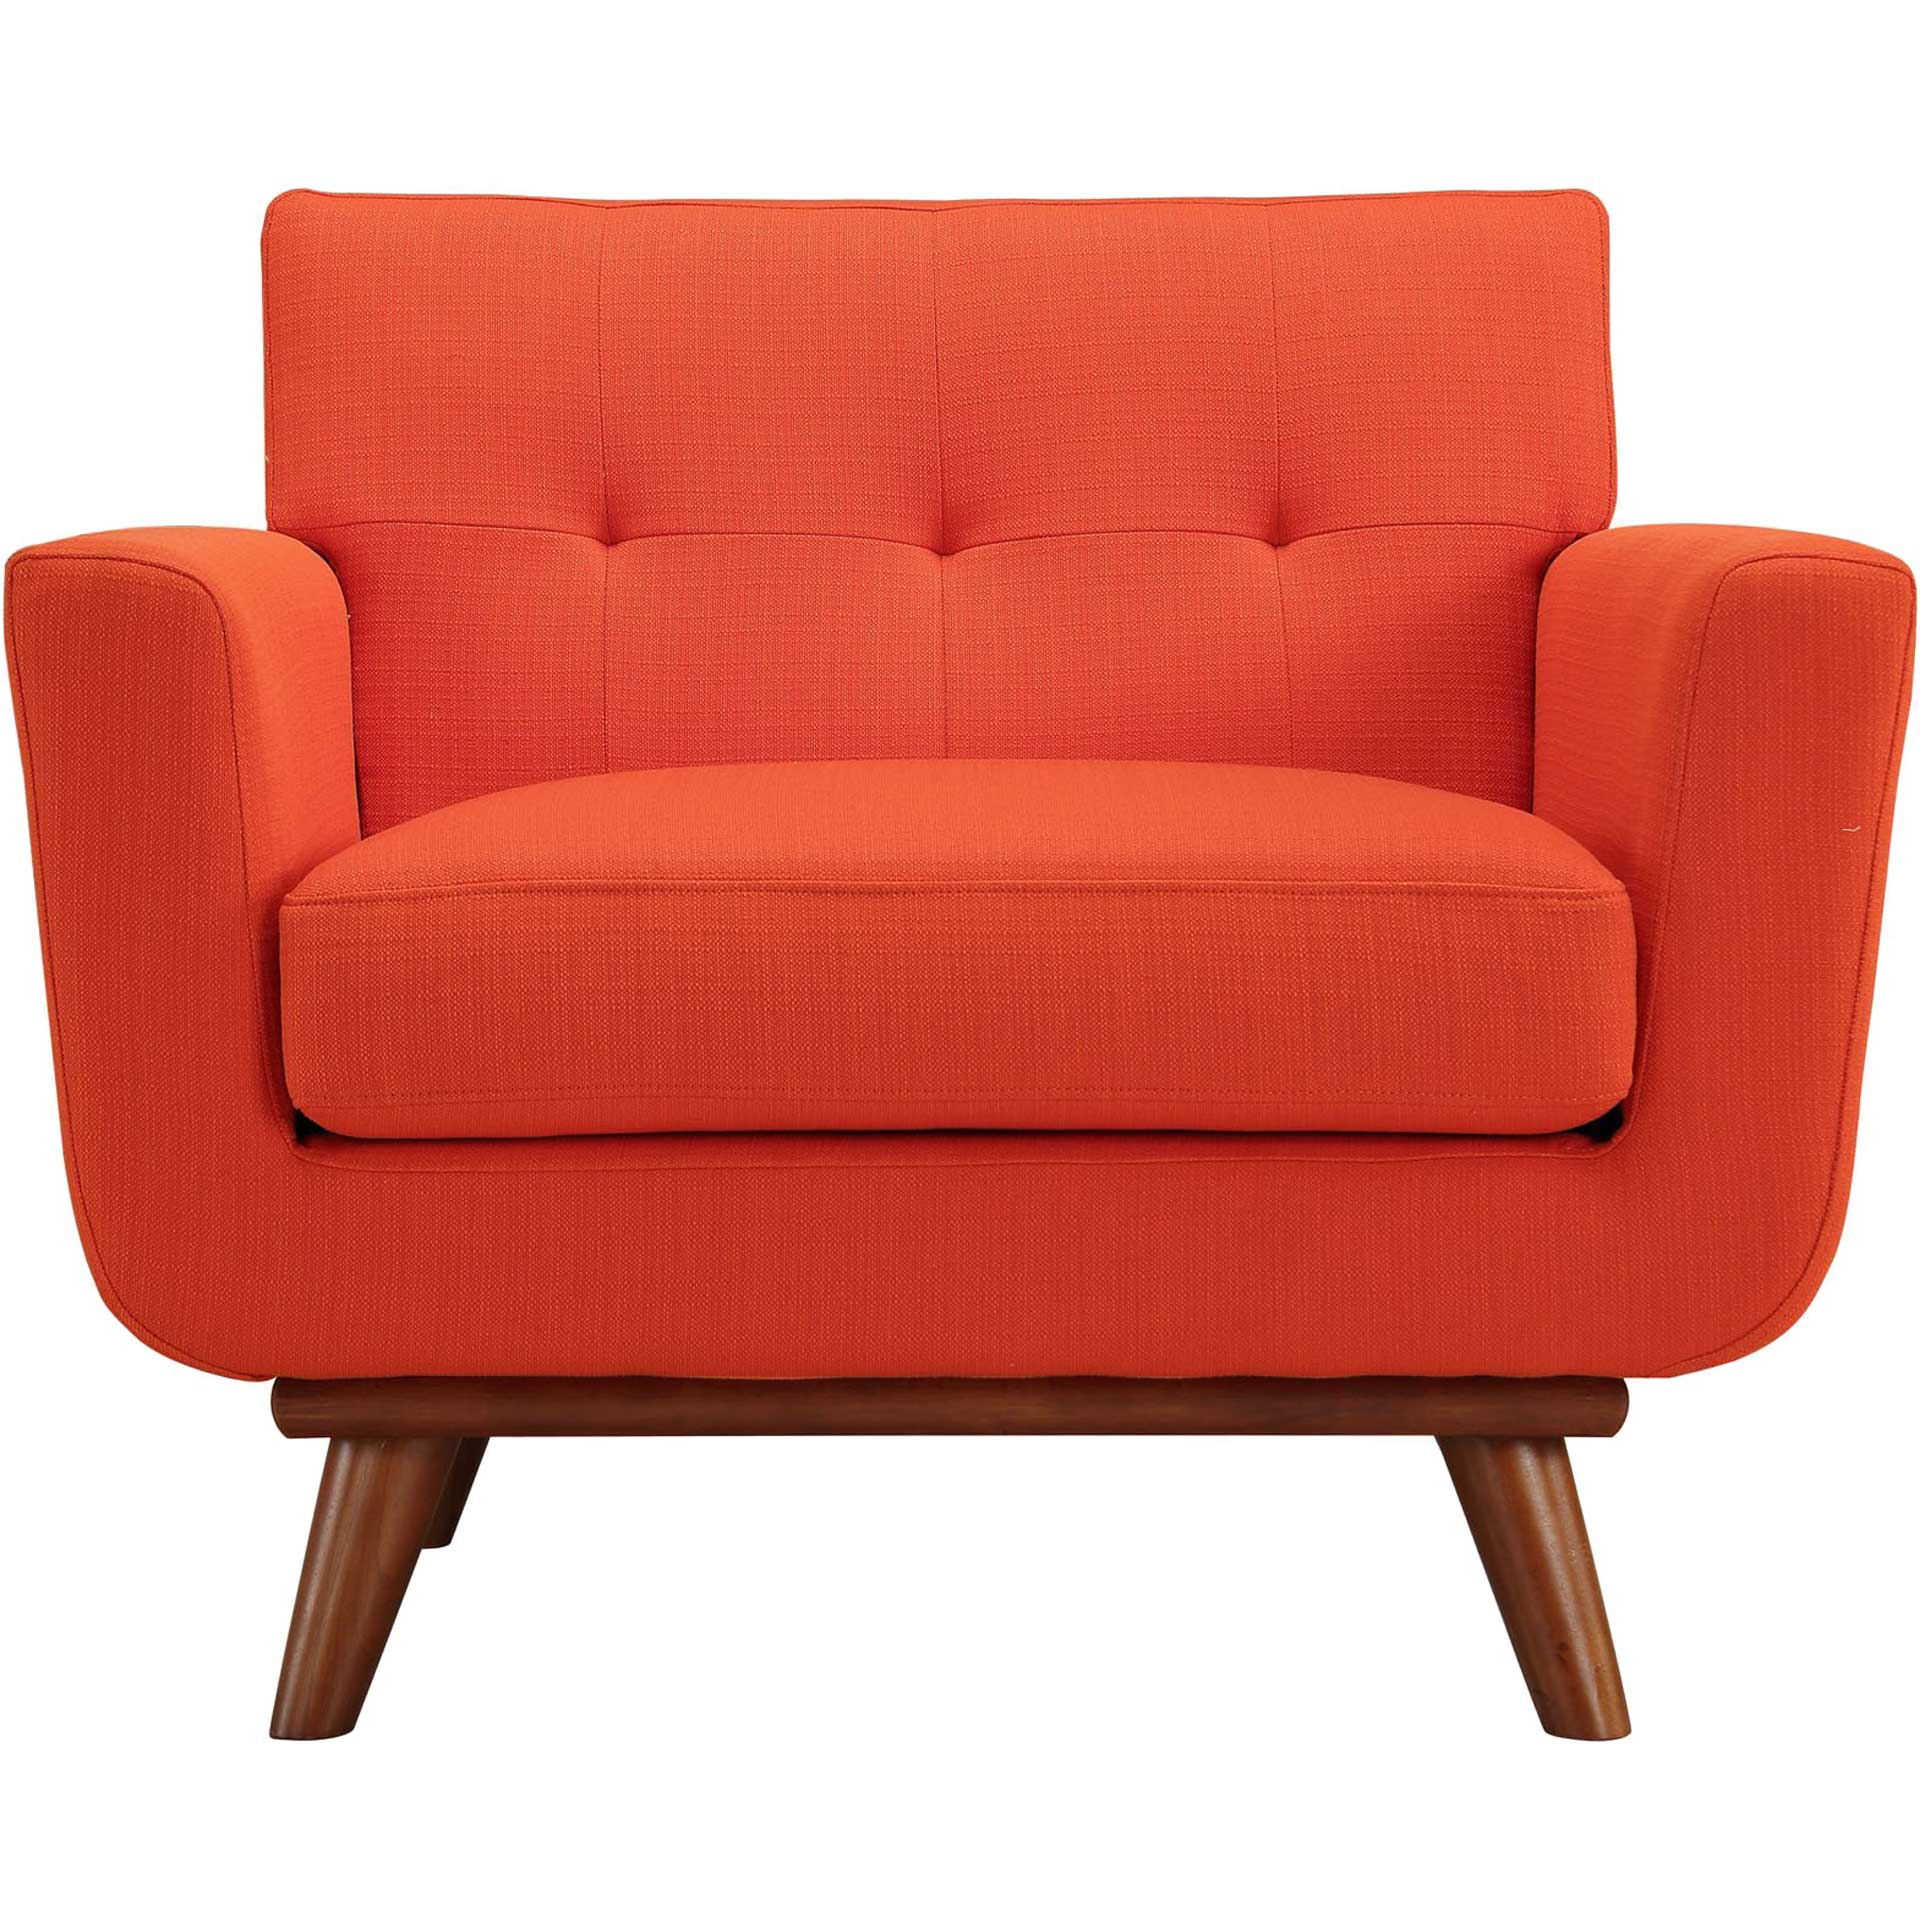 Emory Upholstered Armchair Atomic Red